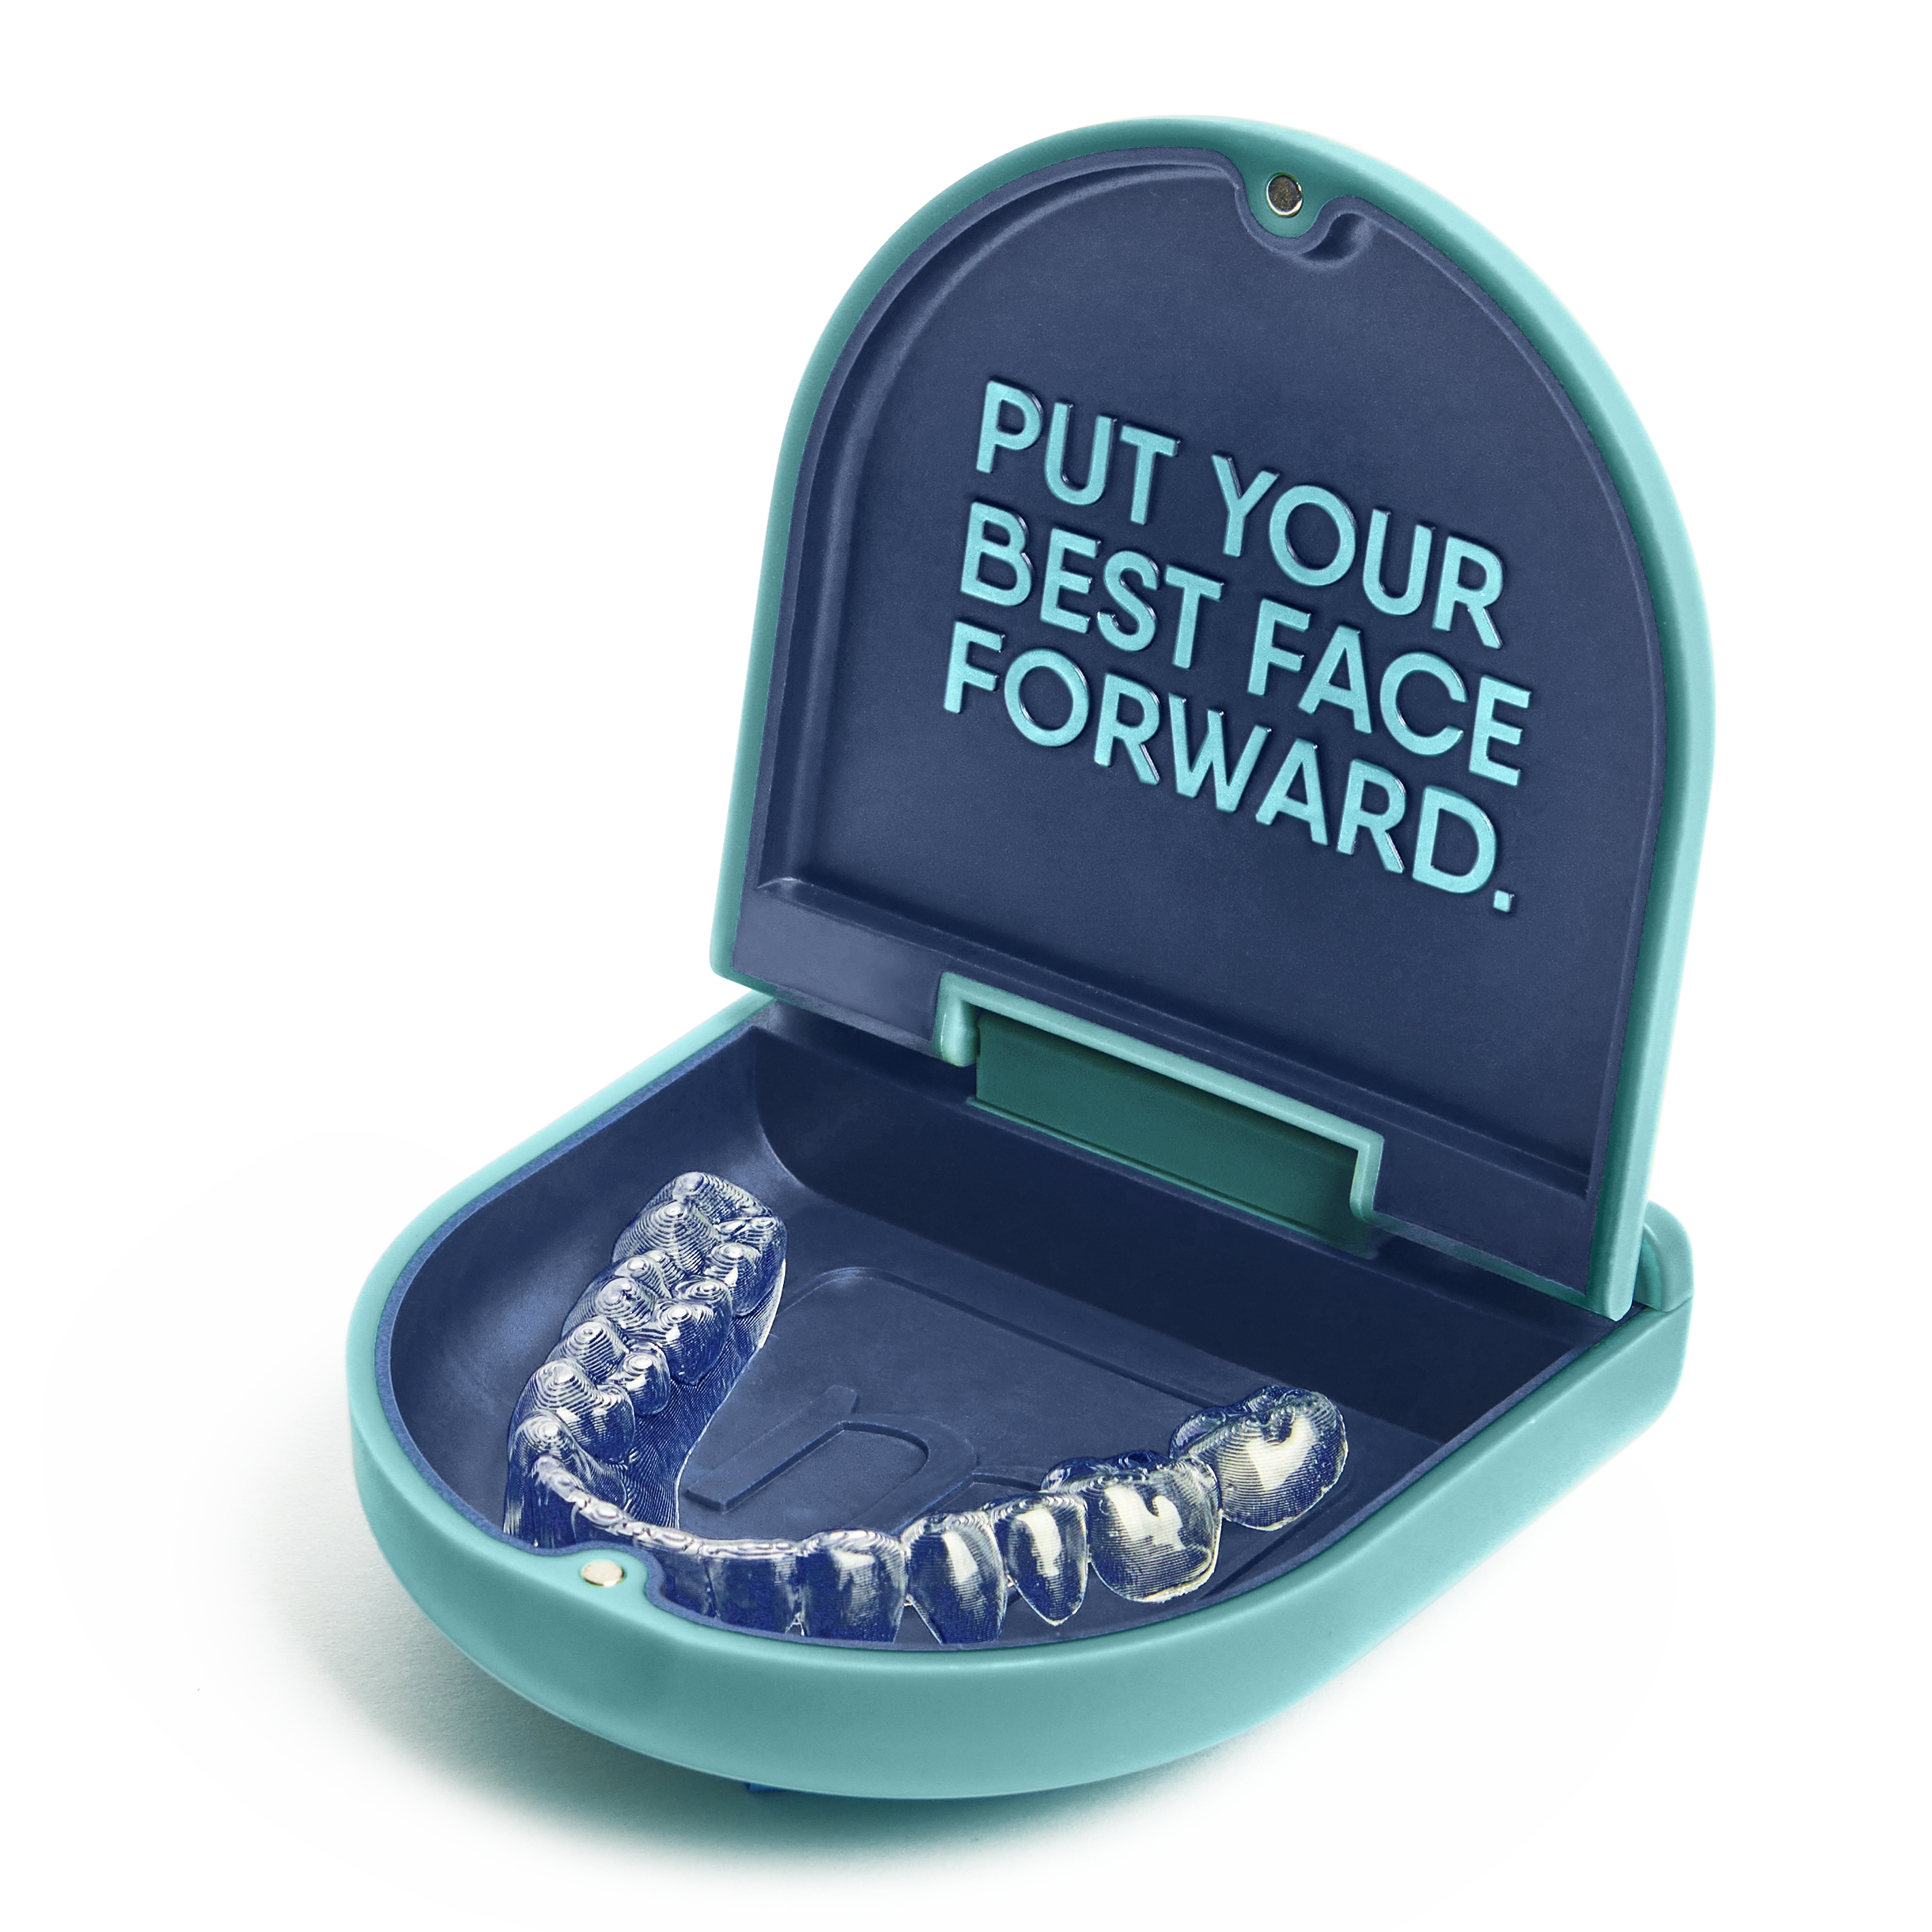 Motto Clear Aligners case that says "Put your best face forward" inside the lid.